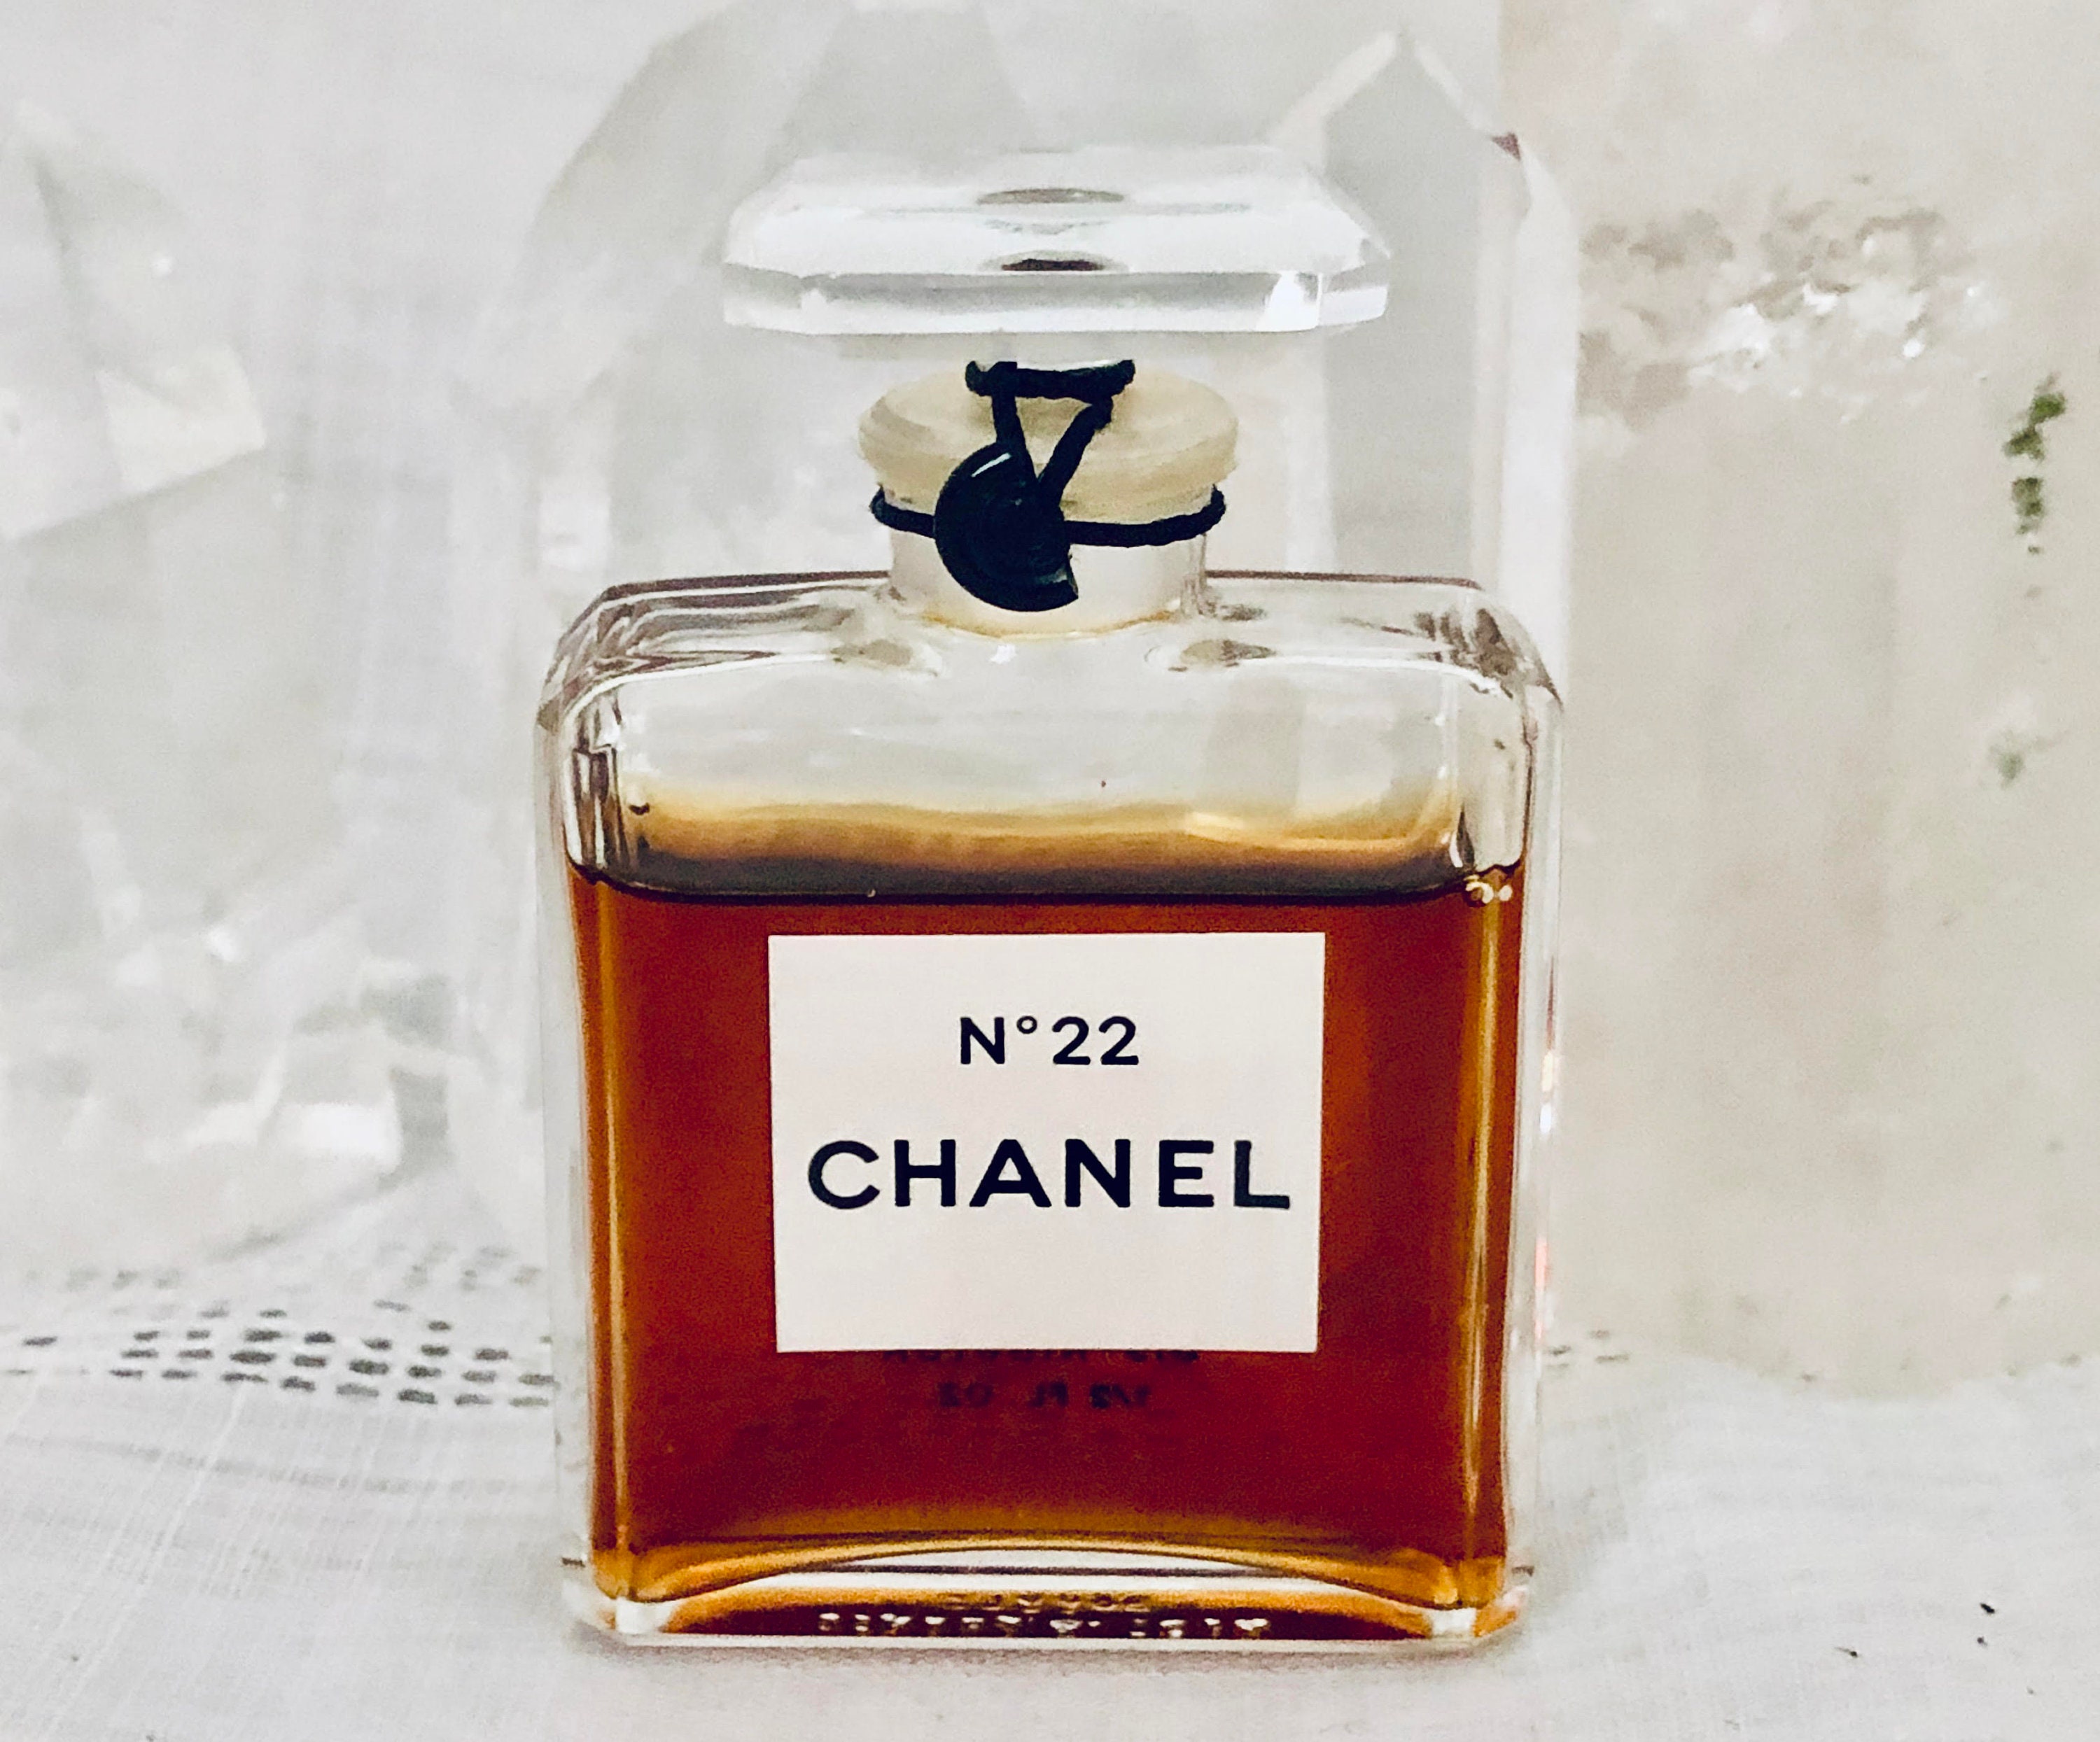 Chanel No.5 Parfum Bottle, 15ml/0.5oz Ingredients and Reviews